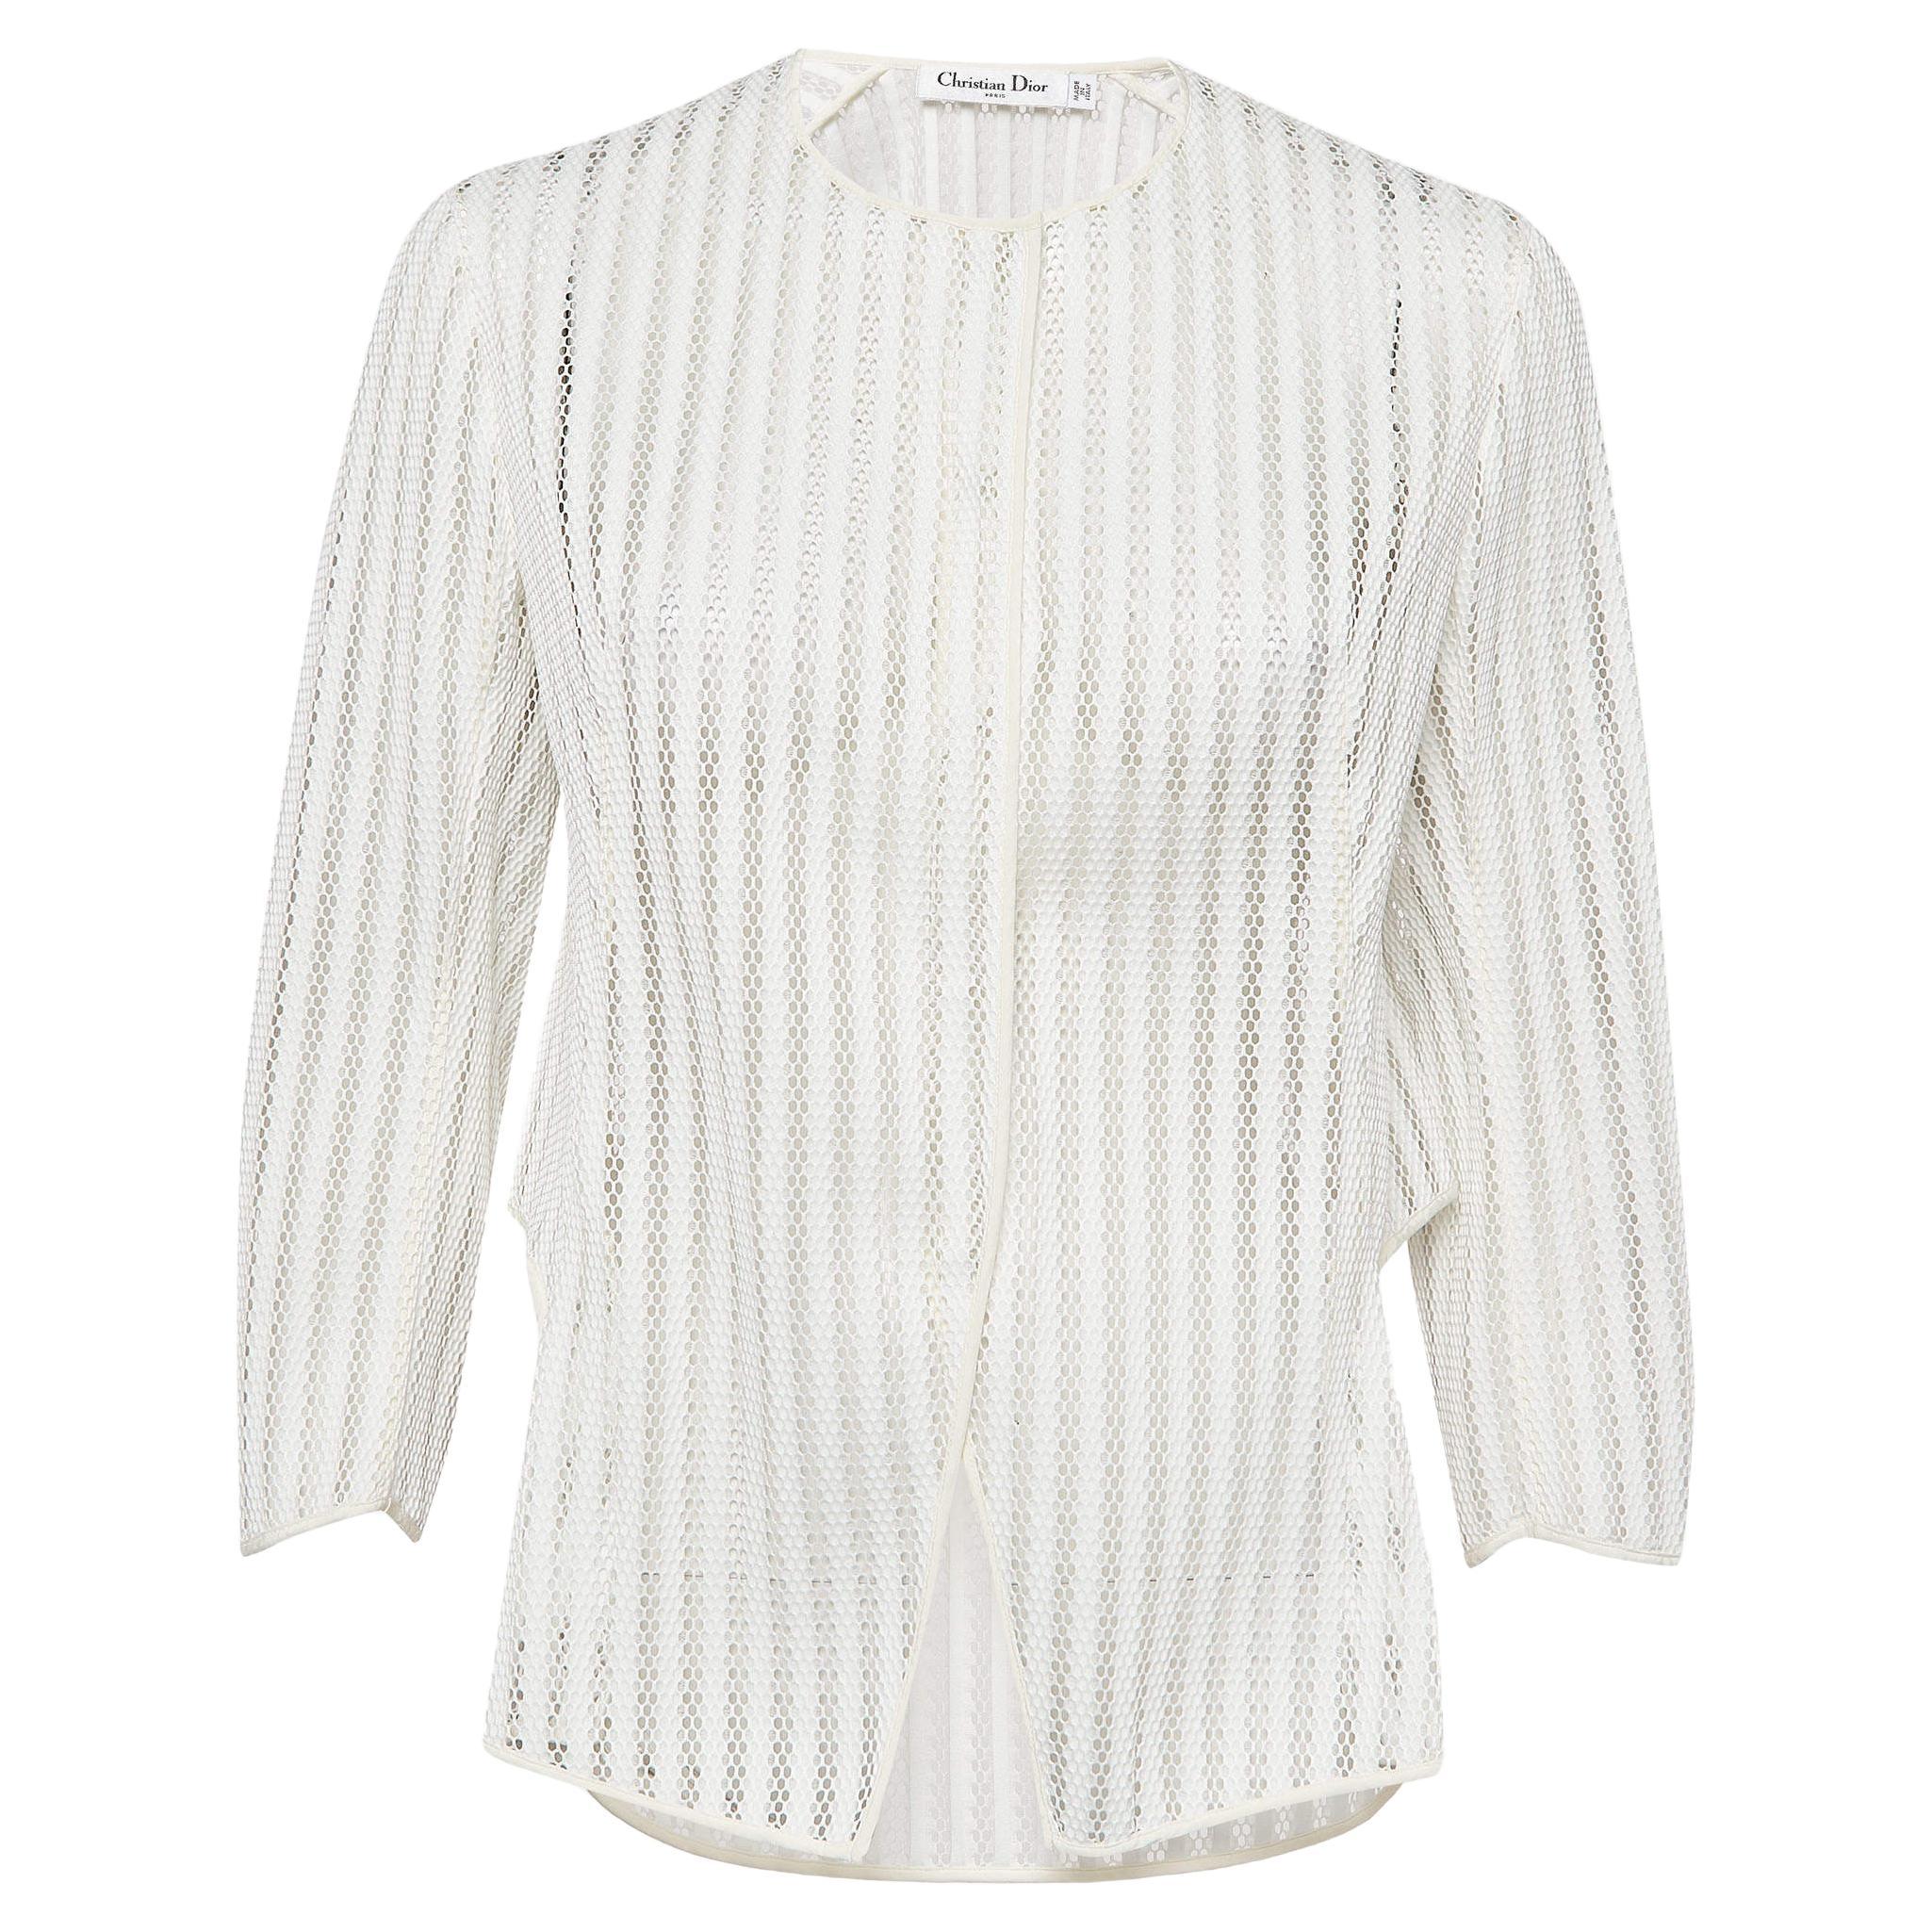 Christian Dior White Eyelet Knit High-Low Sheer Jacket M For Sale